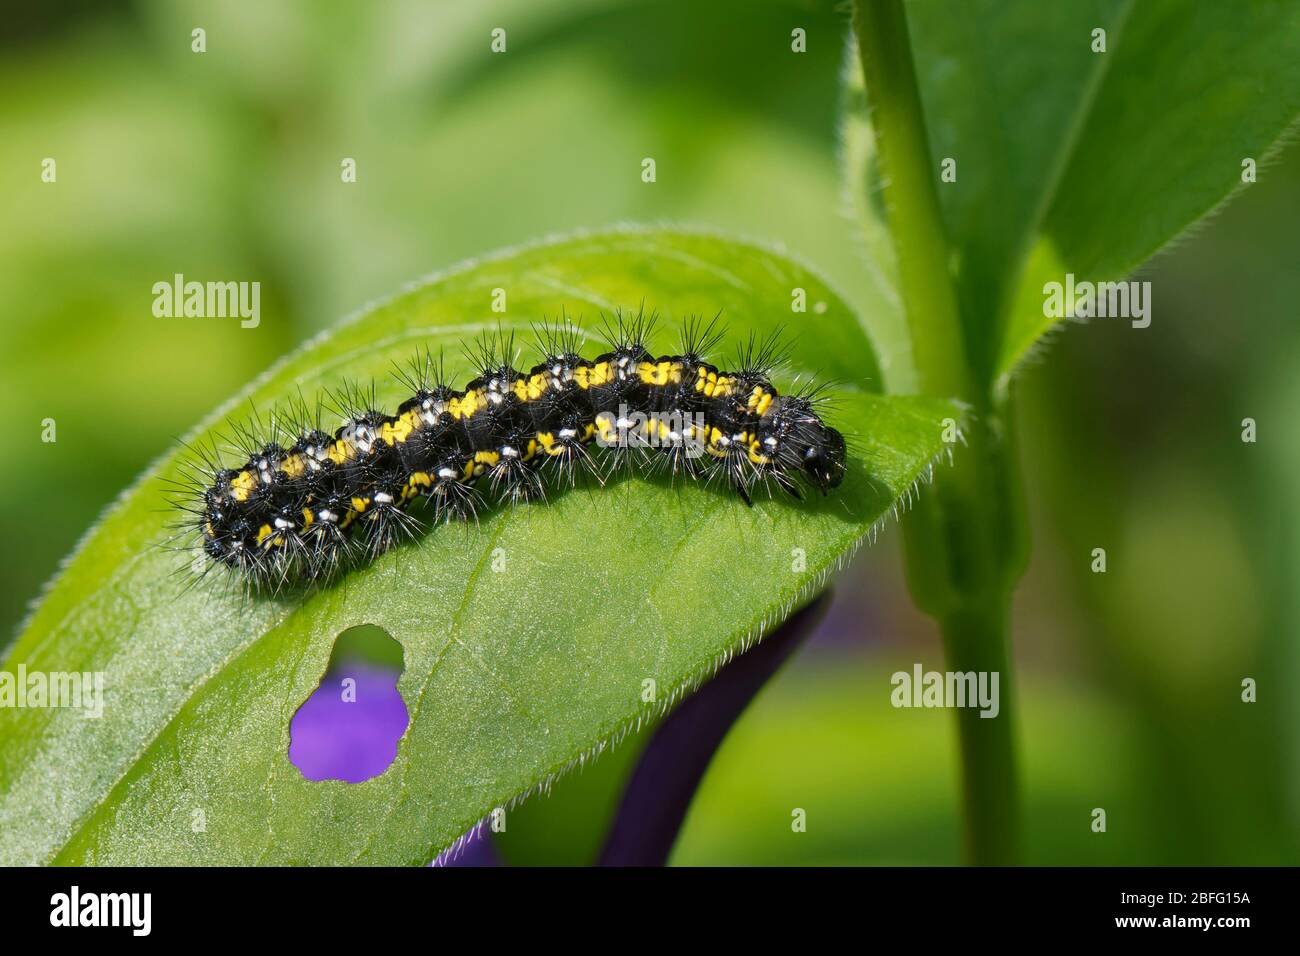 Scarlet tiger moth caterpillar (Callimorpha dominula) on a Greater periwinkle (Vinca major) leaf in a garden, Wiltshire, UK, April. Stock Photo